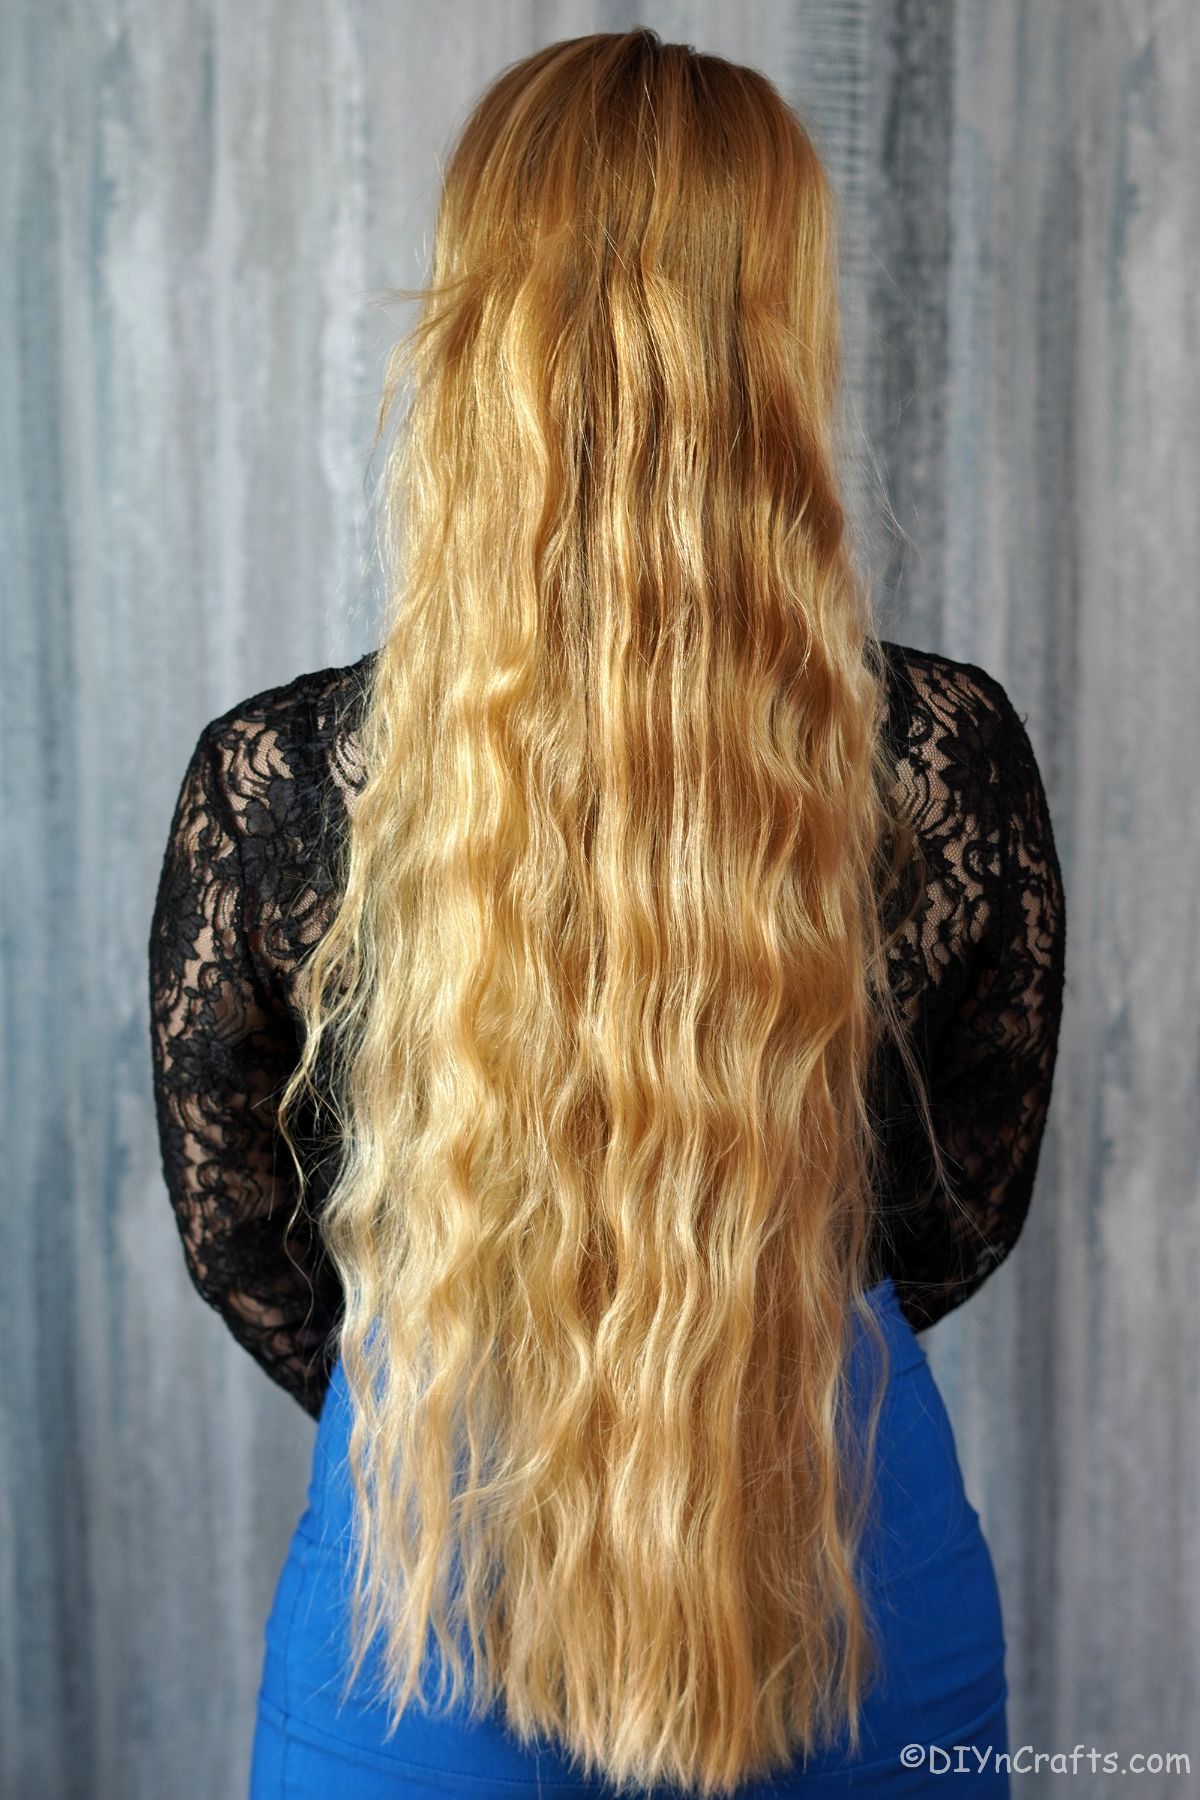 back of blondes head showing long hair with beach waves